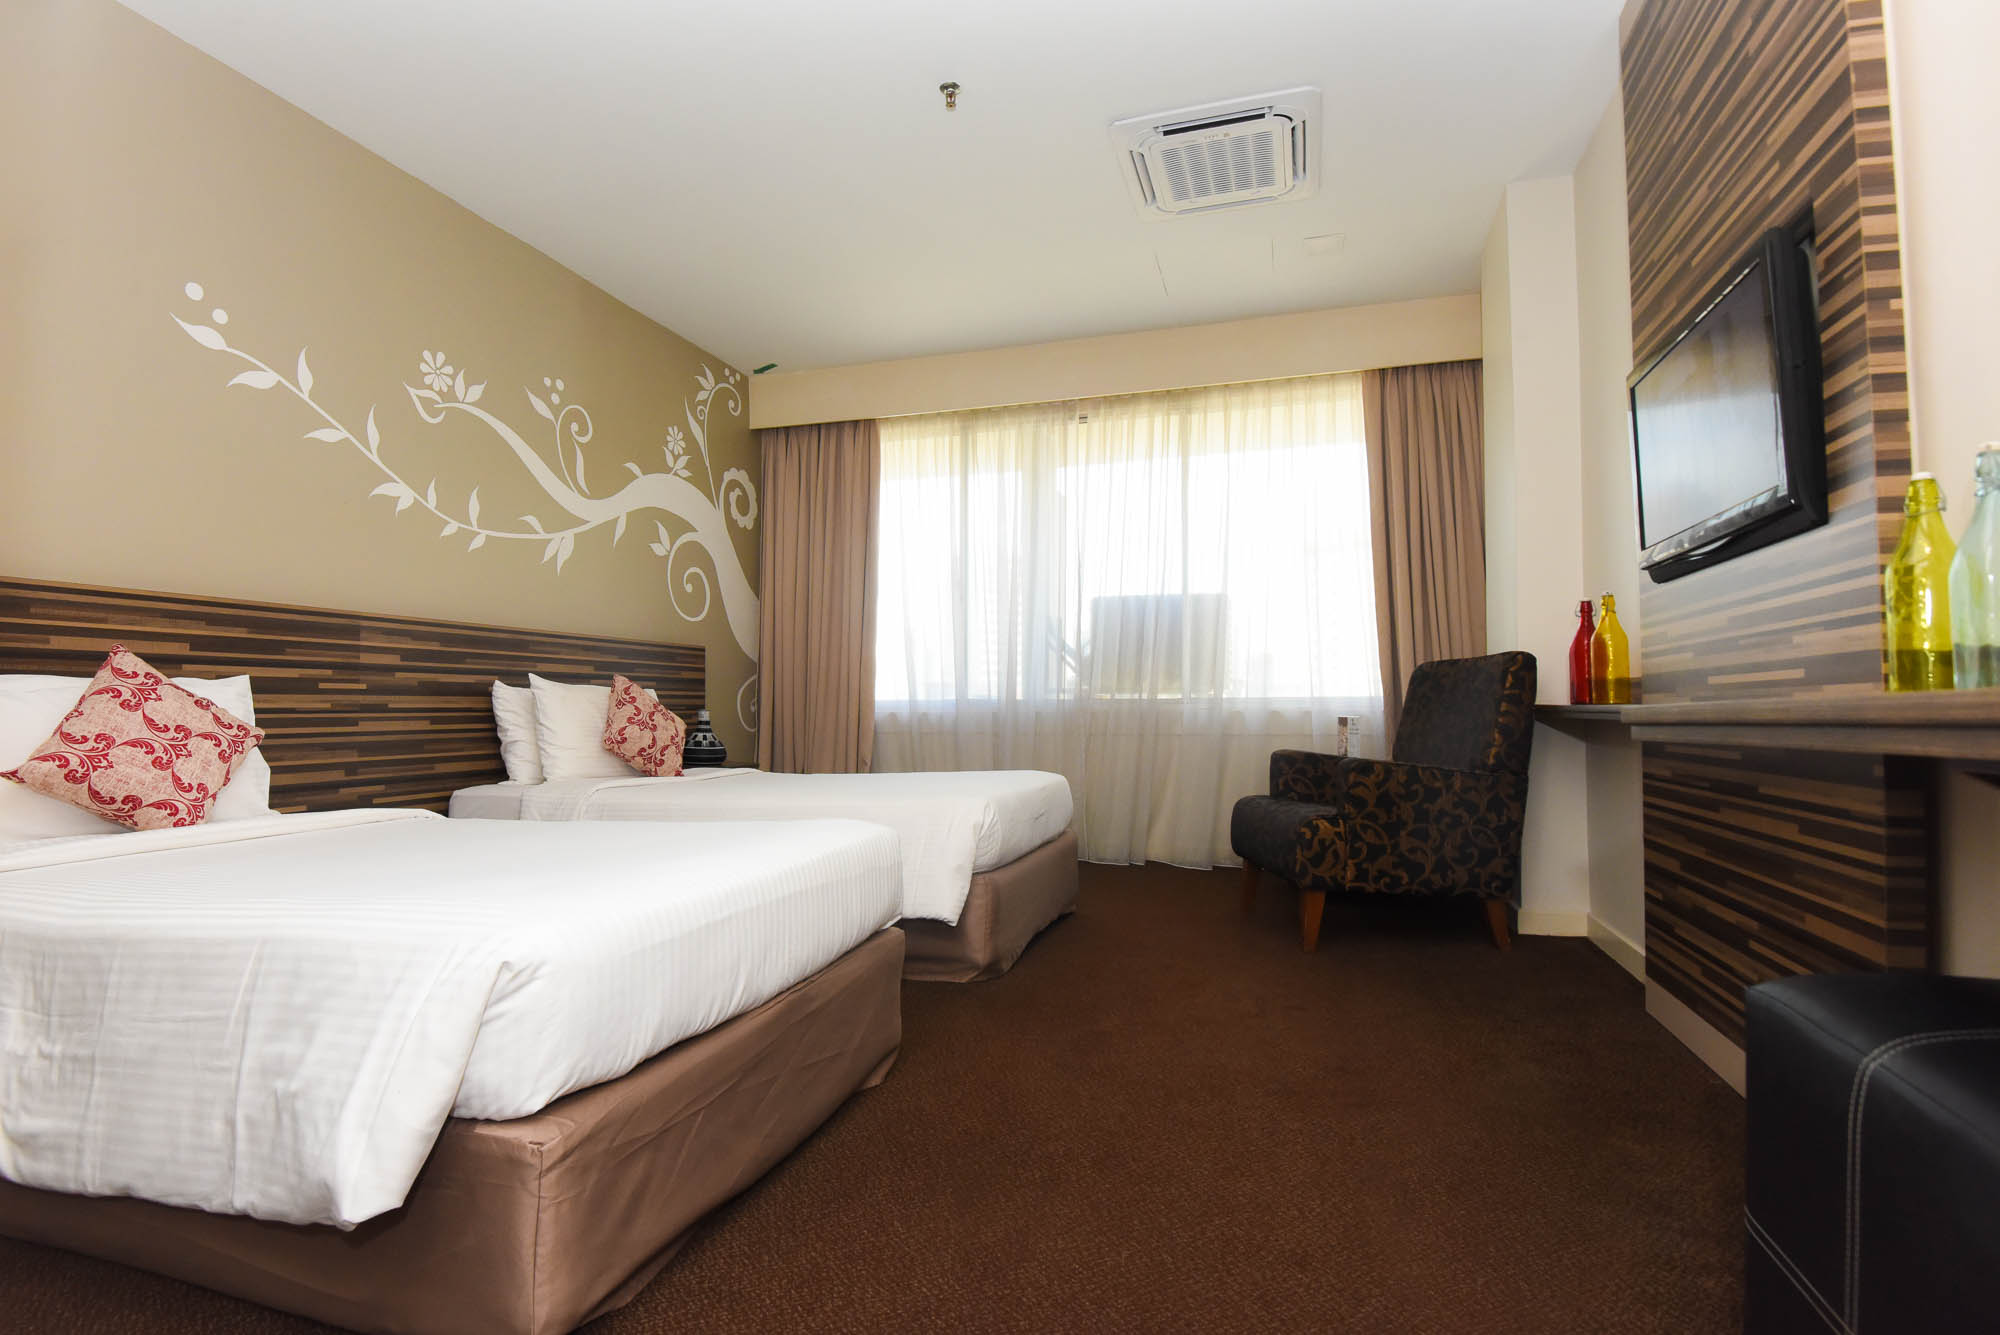 The Superior Twin room is designed to cater the needs of many with the comfortable twin beds, satellite television, complimentary WiFi, in-room safe and many more. Kick back and relax in this room for two. Dental kit, hair dryer and ironing facilities are available upon request.